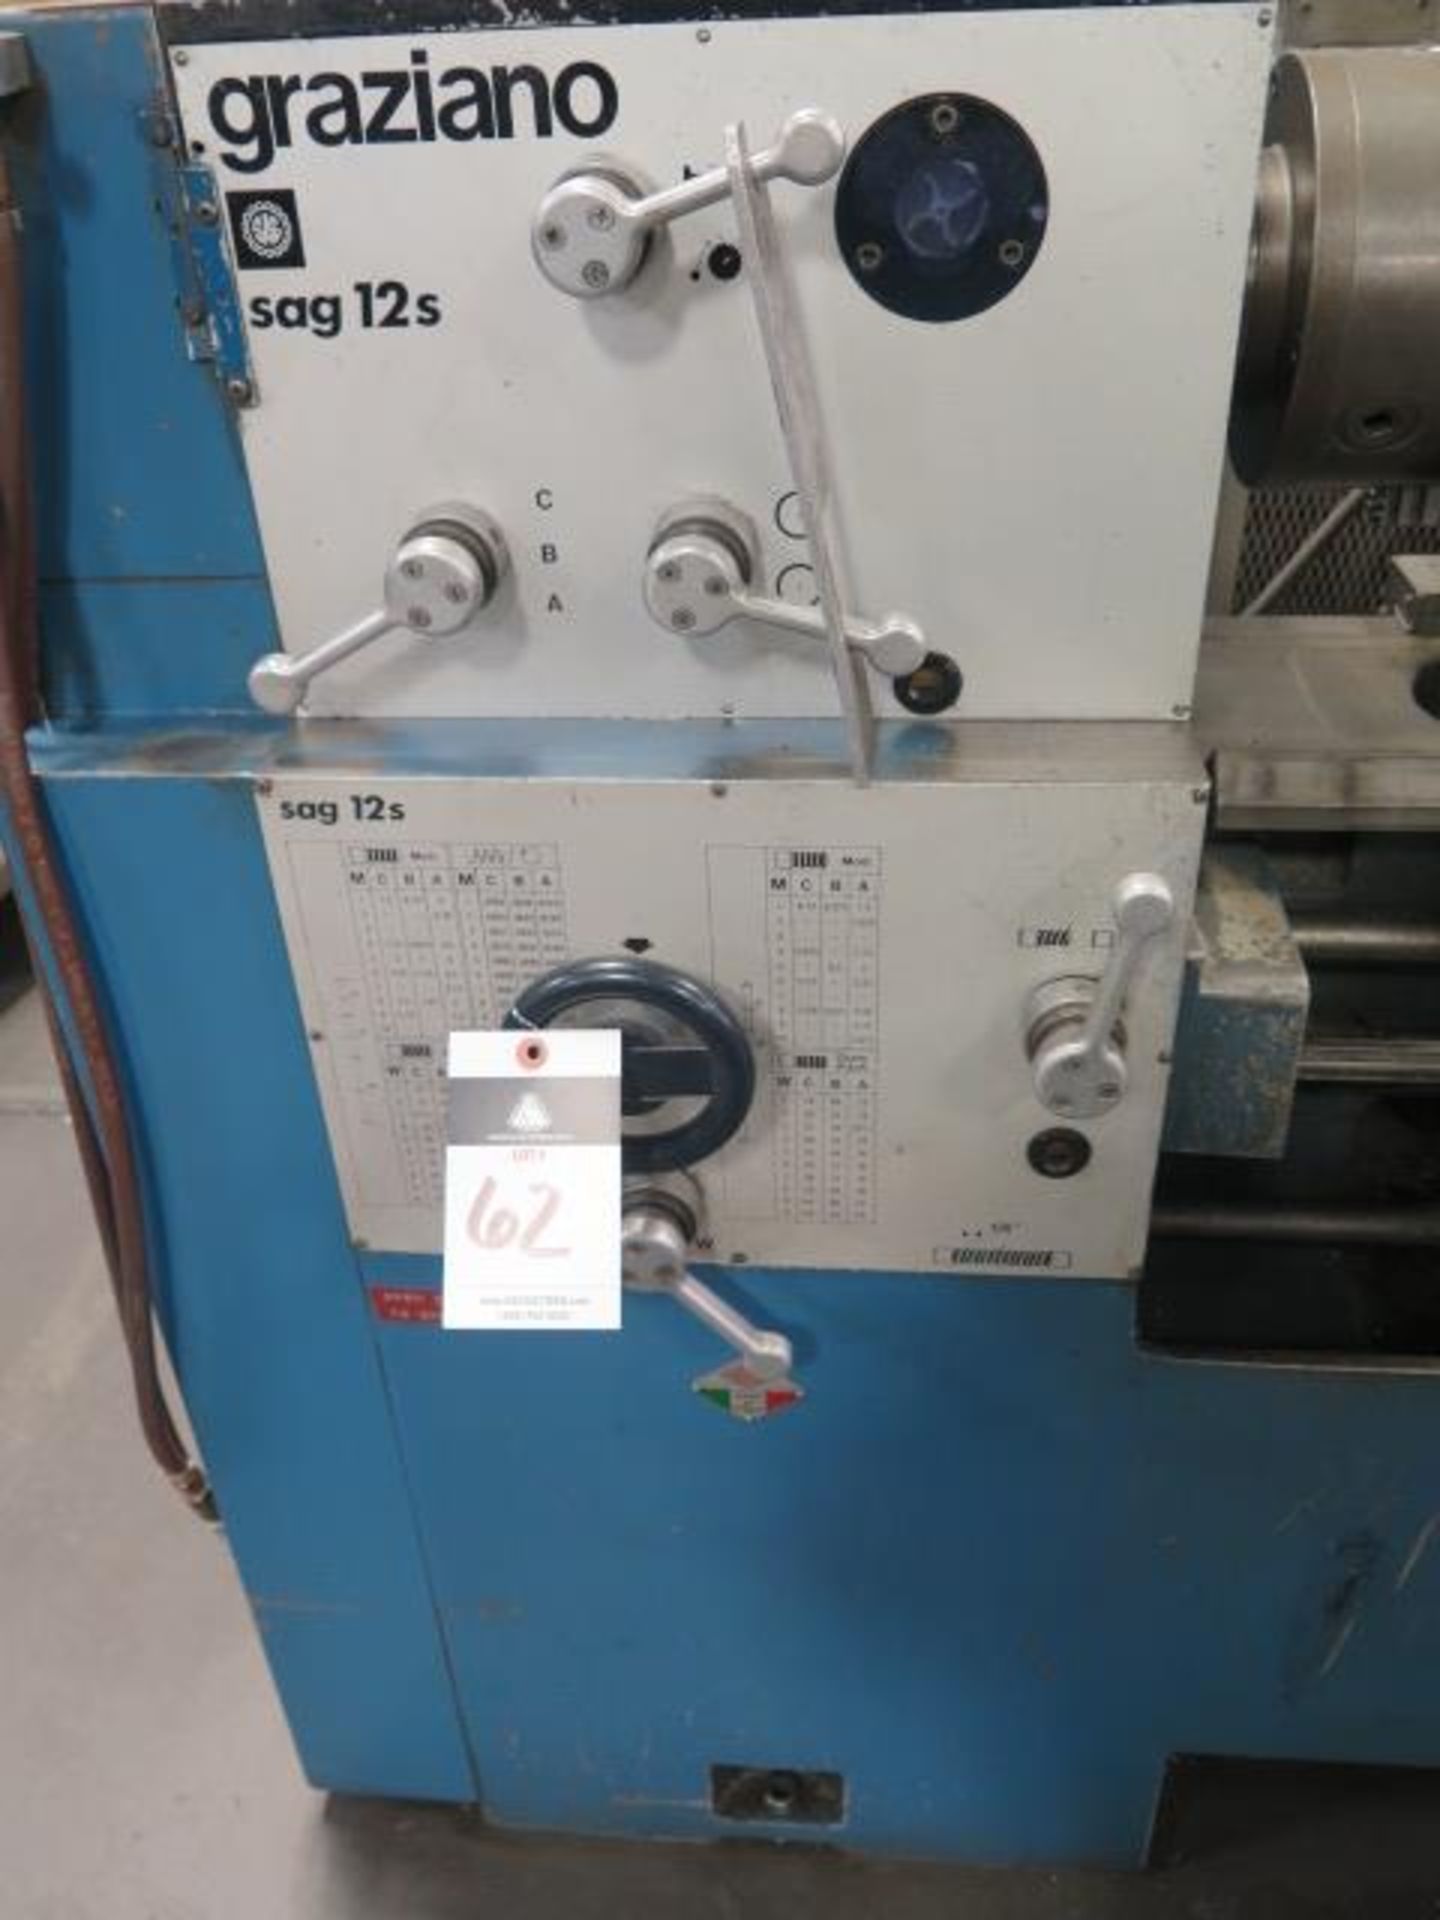 Graziano SAG-12S 12” x 32” Gap Bed Lathe s/n SAG-12-110224 w/ Adjustable RPM, Inch/mm Threading, - Image 4 of 12